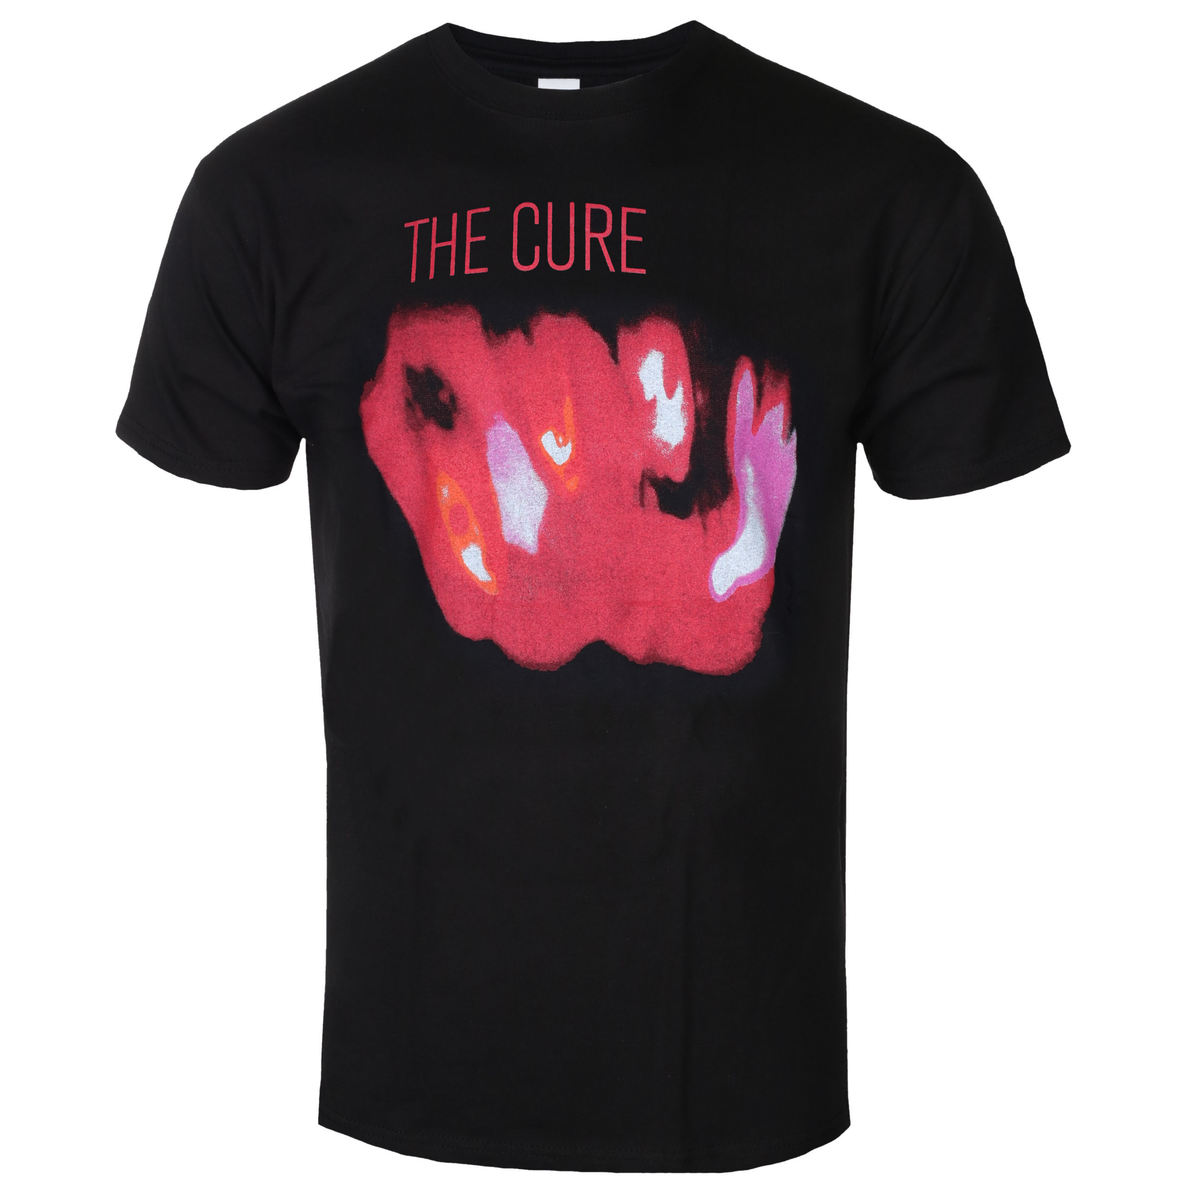 The Cure - Pornography (XL)